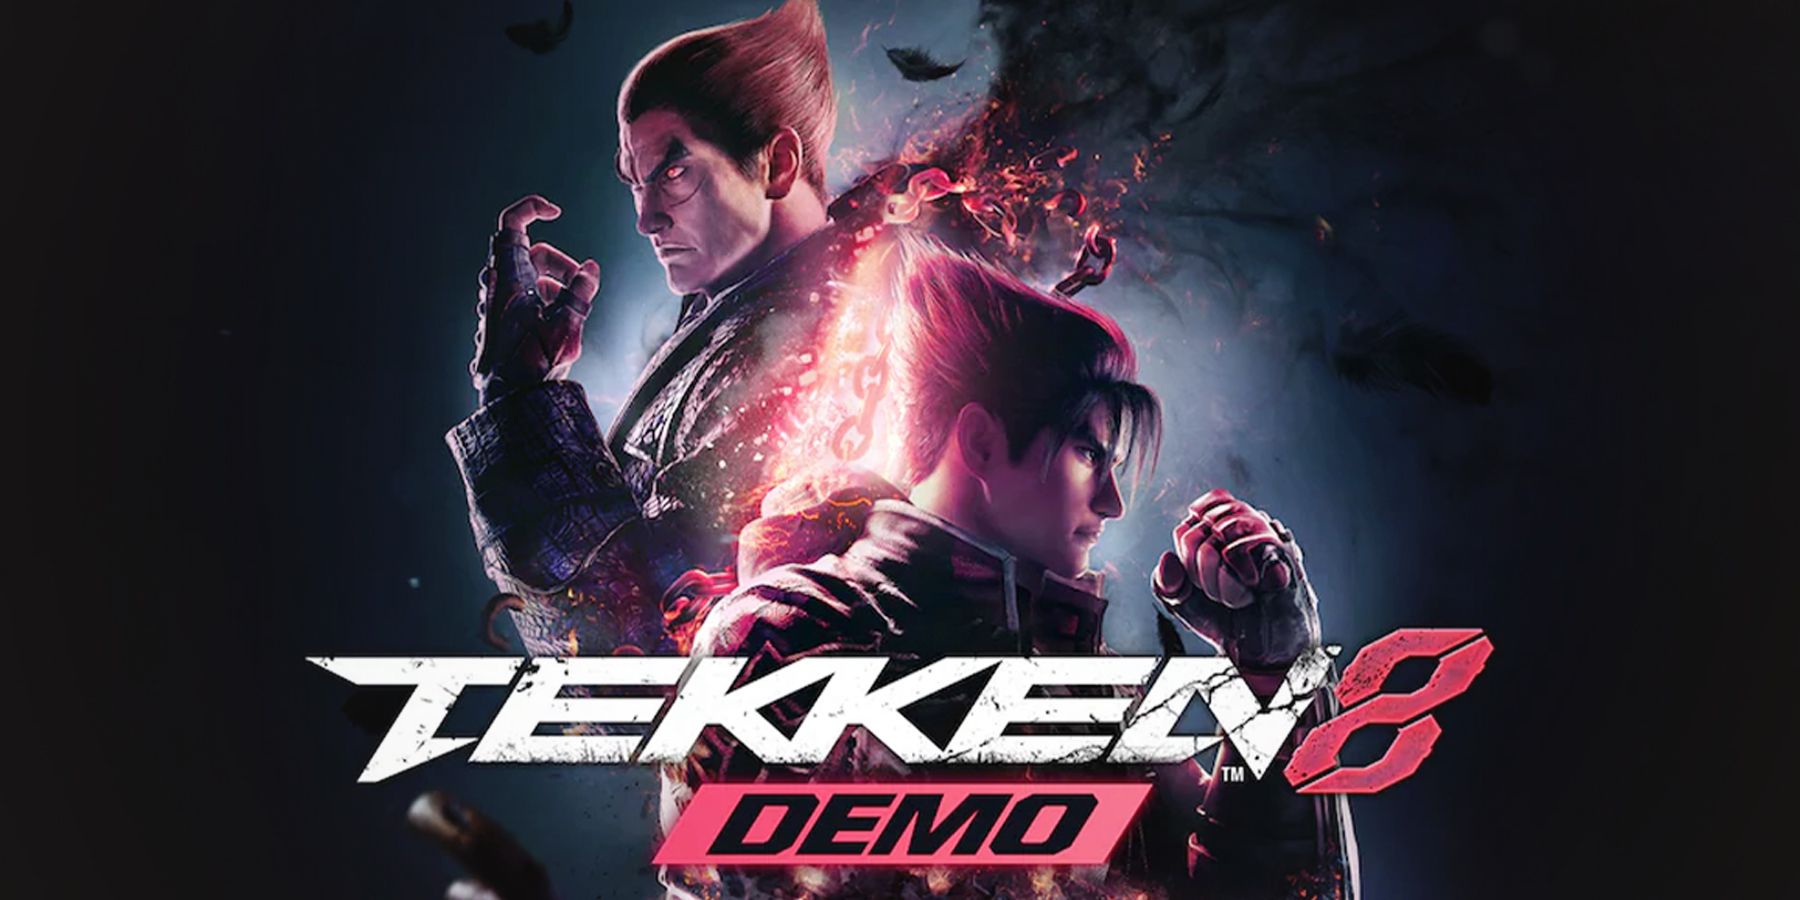 The Tekken 8 Network Test As Told By Harada - Esports Illustrated